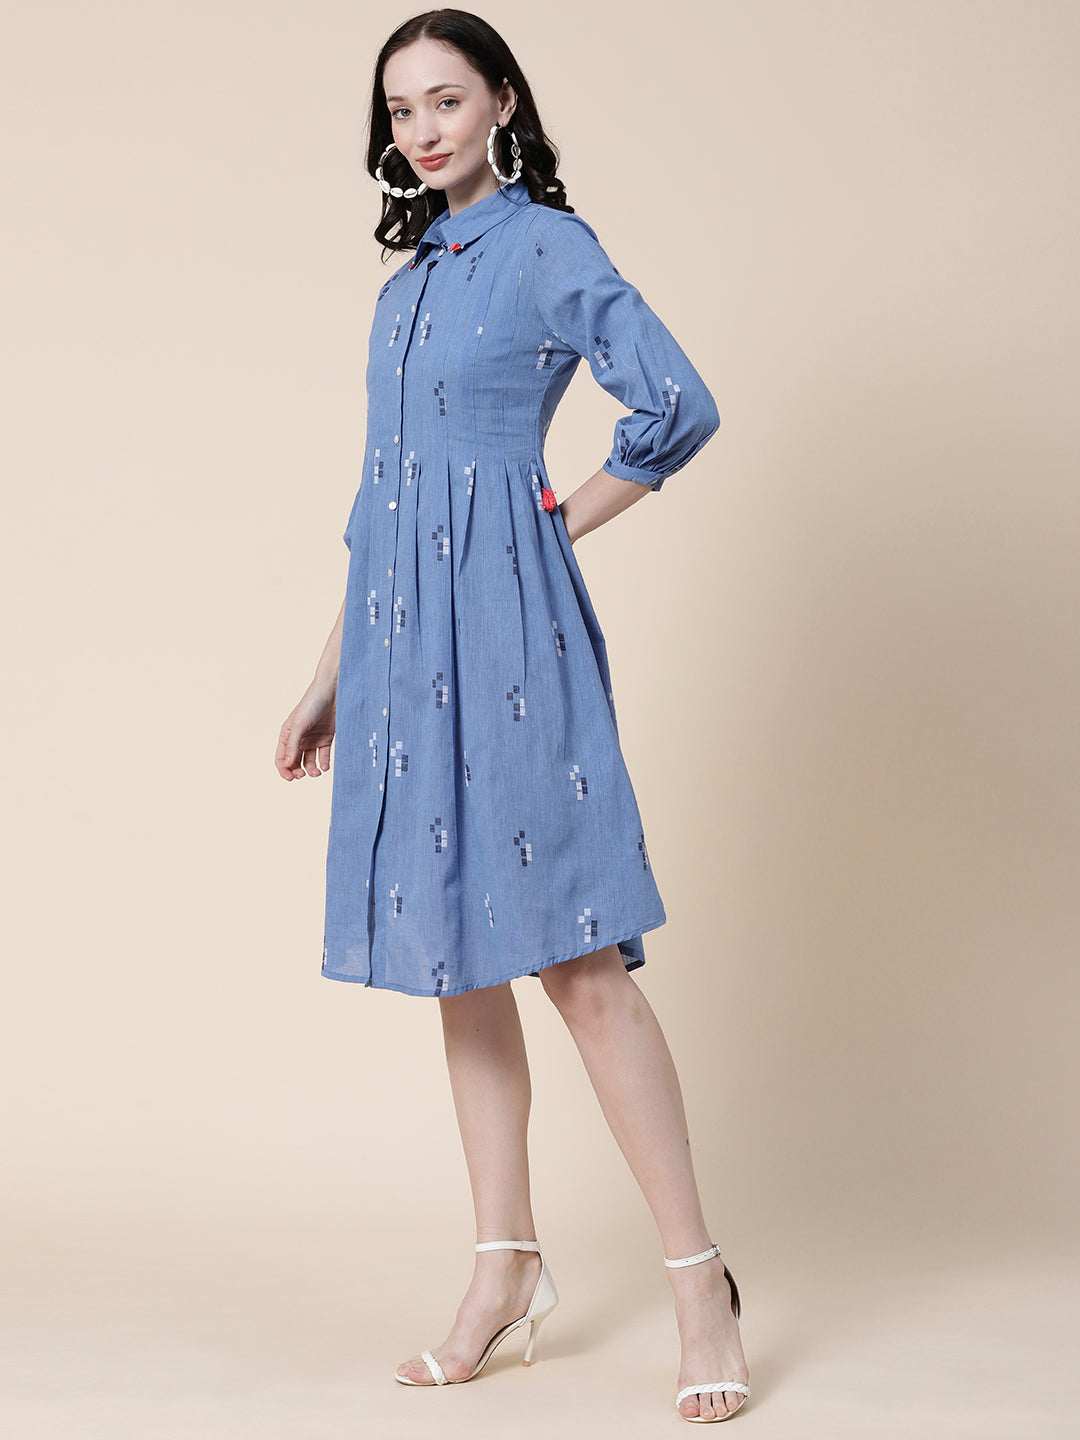 Woven Resham Jacquard Mother-of-Pearl Buttoned Pin-Tucks Dress - Blue